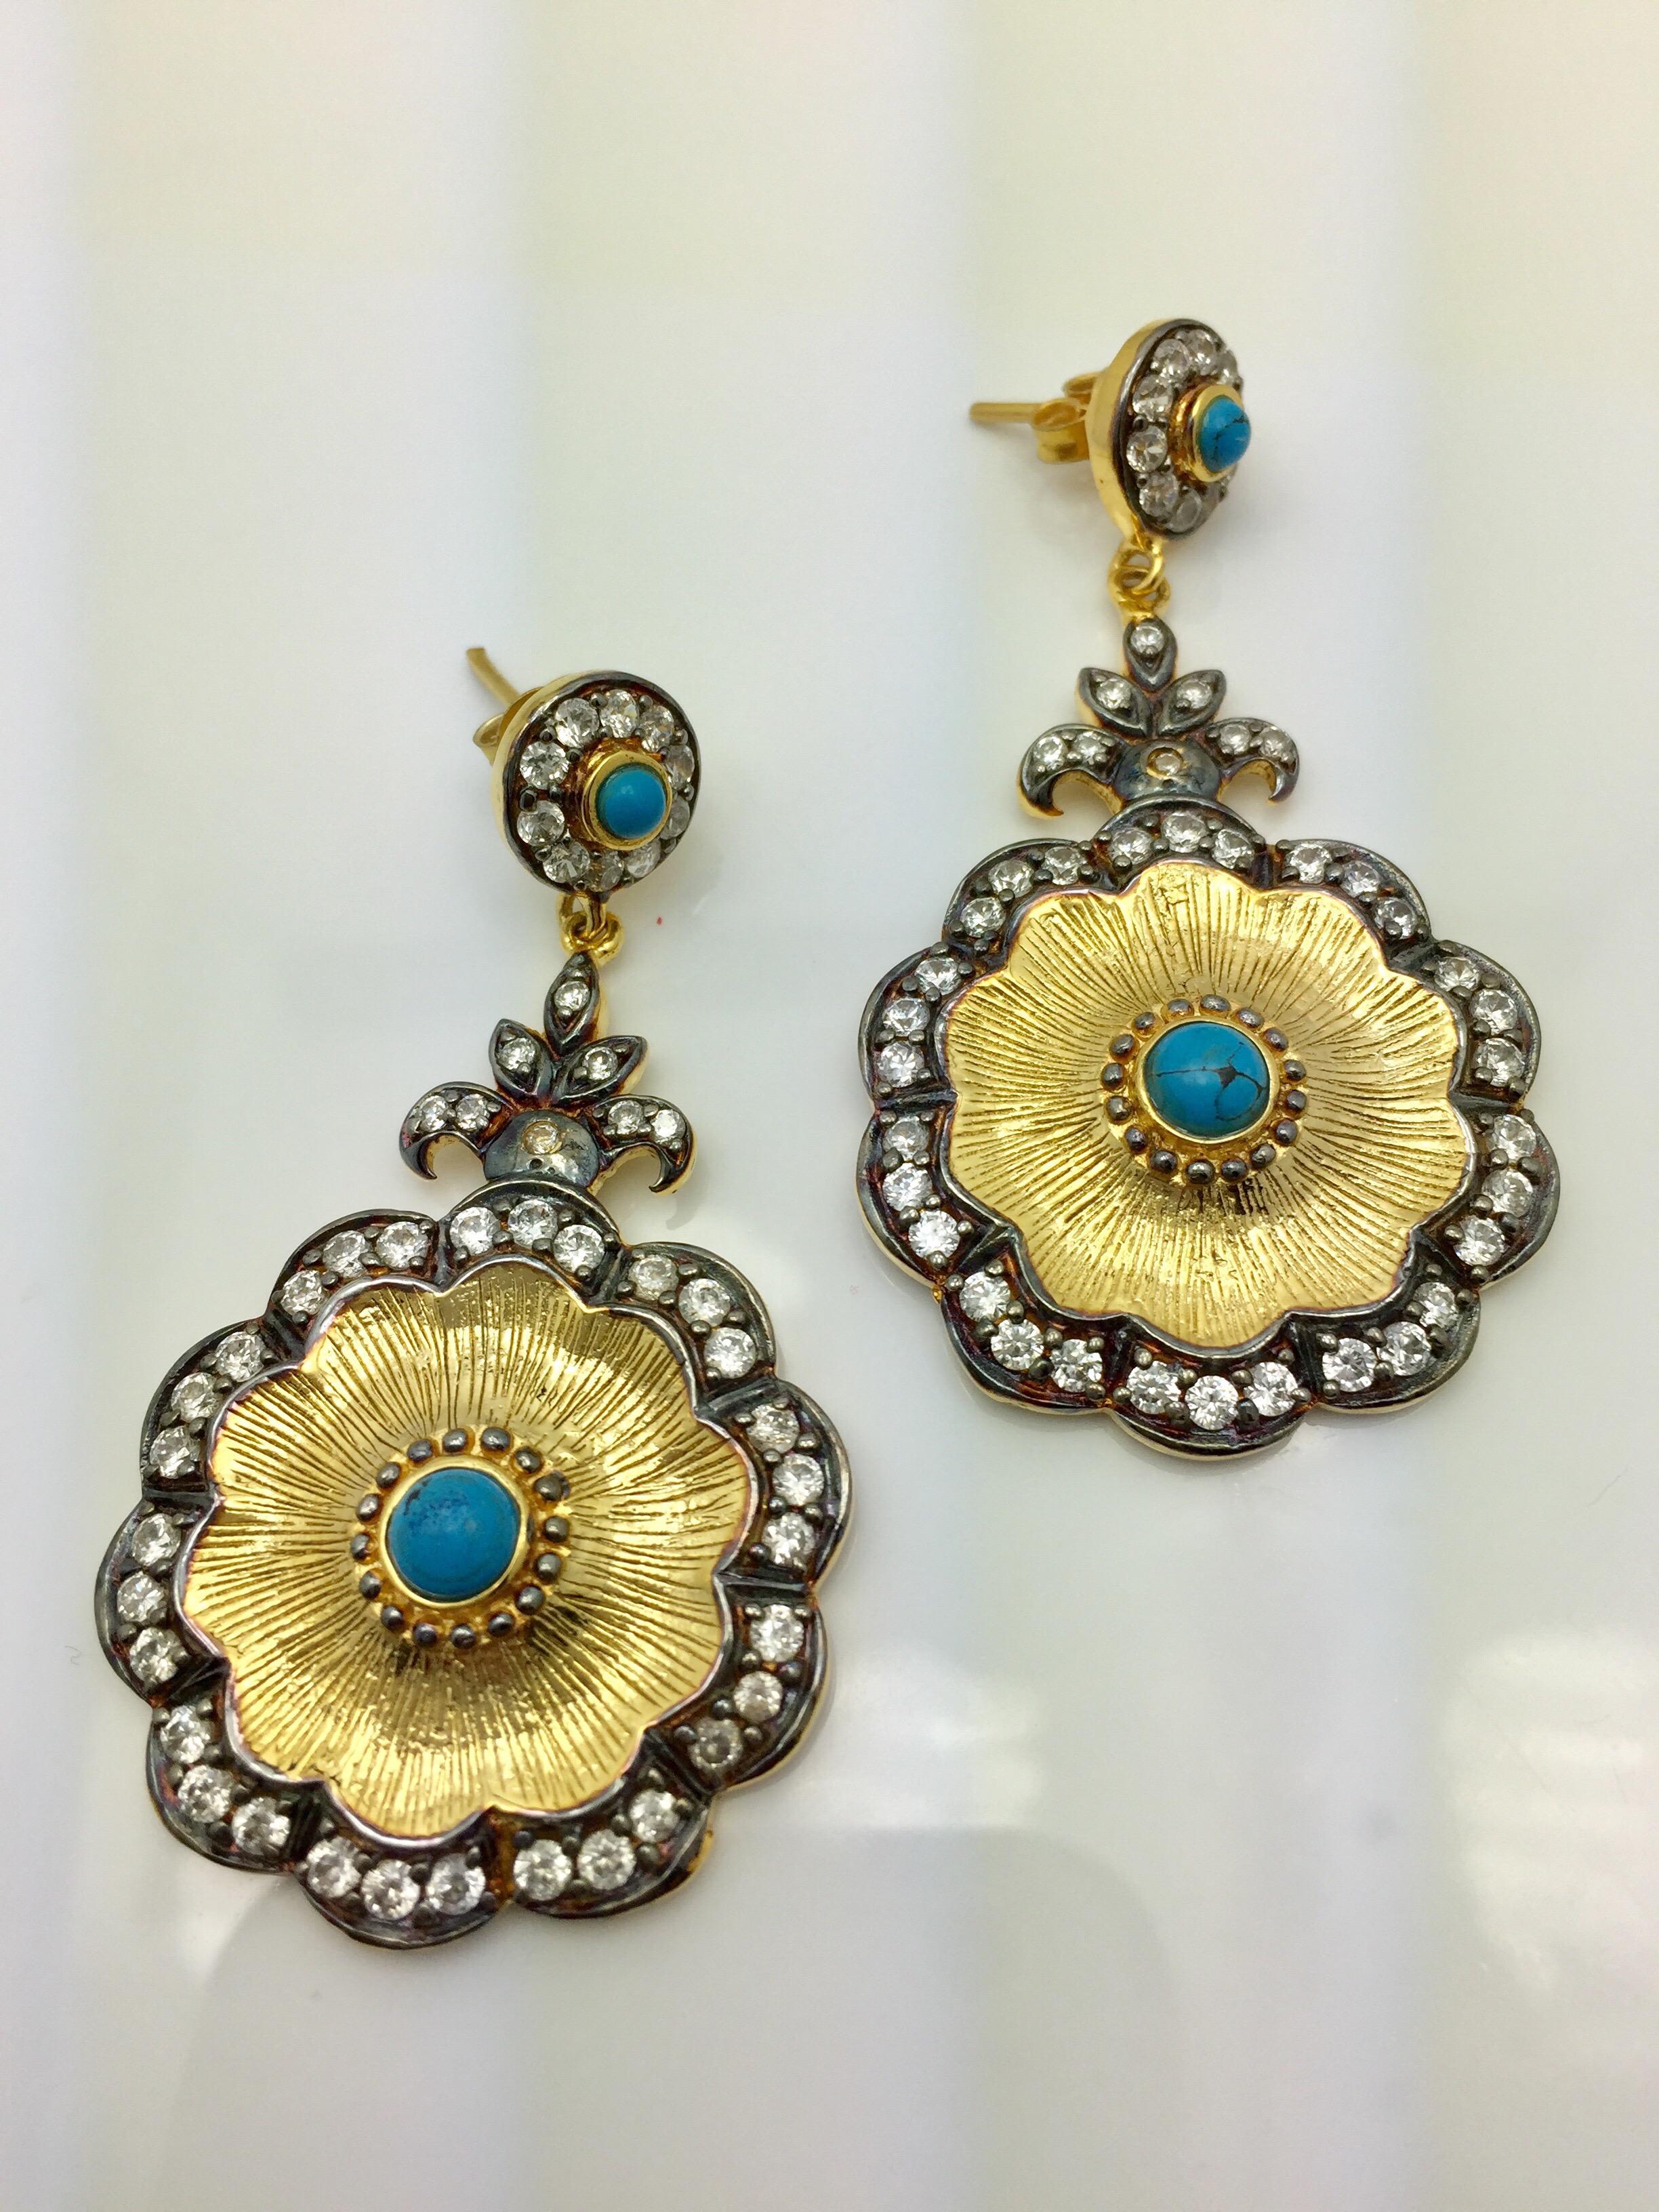 Two-tones: silver and gold, coexist in harmony, enhanced by dozens of twinkling CZ stones in flower shaped turquoise and CZ drop earrings. These earrings hit all the trends in an elegantly beautiful way. Earrings have a post closure for pierced